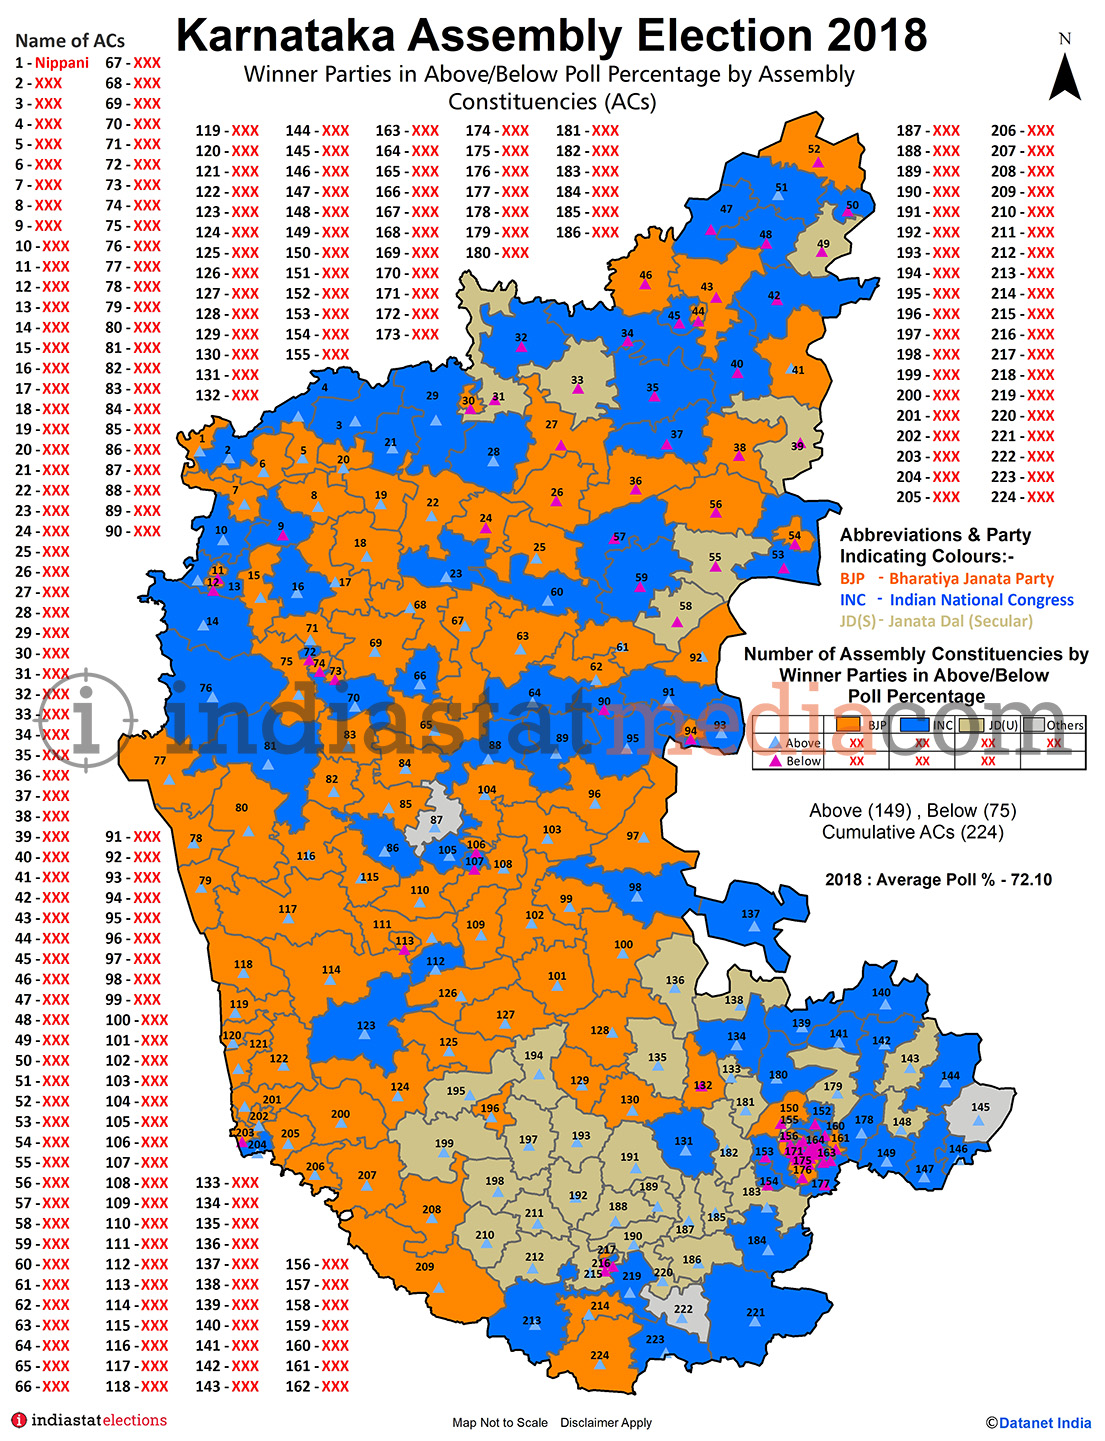 Winner Parties in Above and Below Poll Percentage by Constituencies in Karnataka (Assembly Election - 2018)